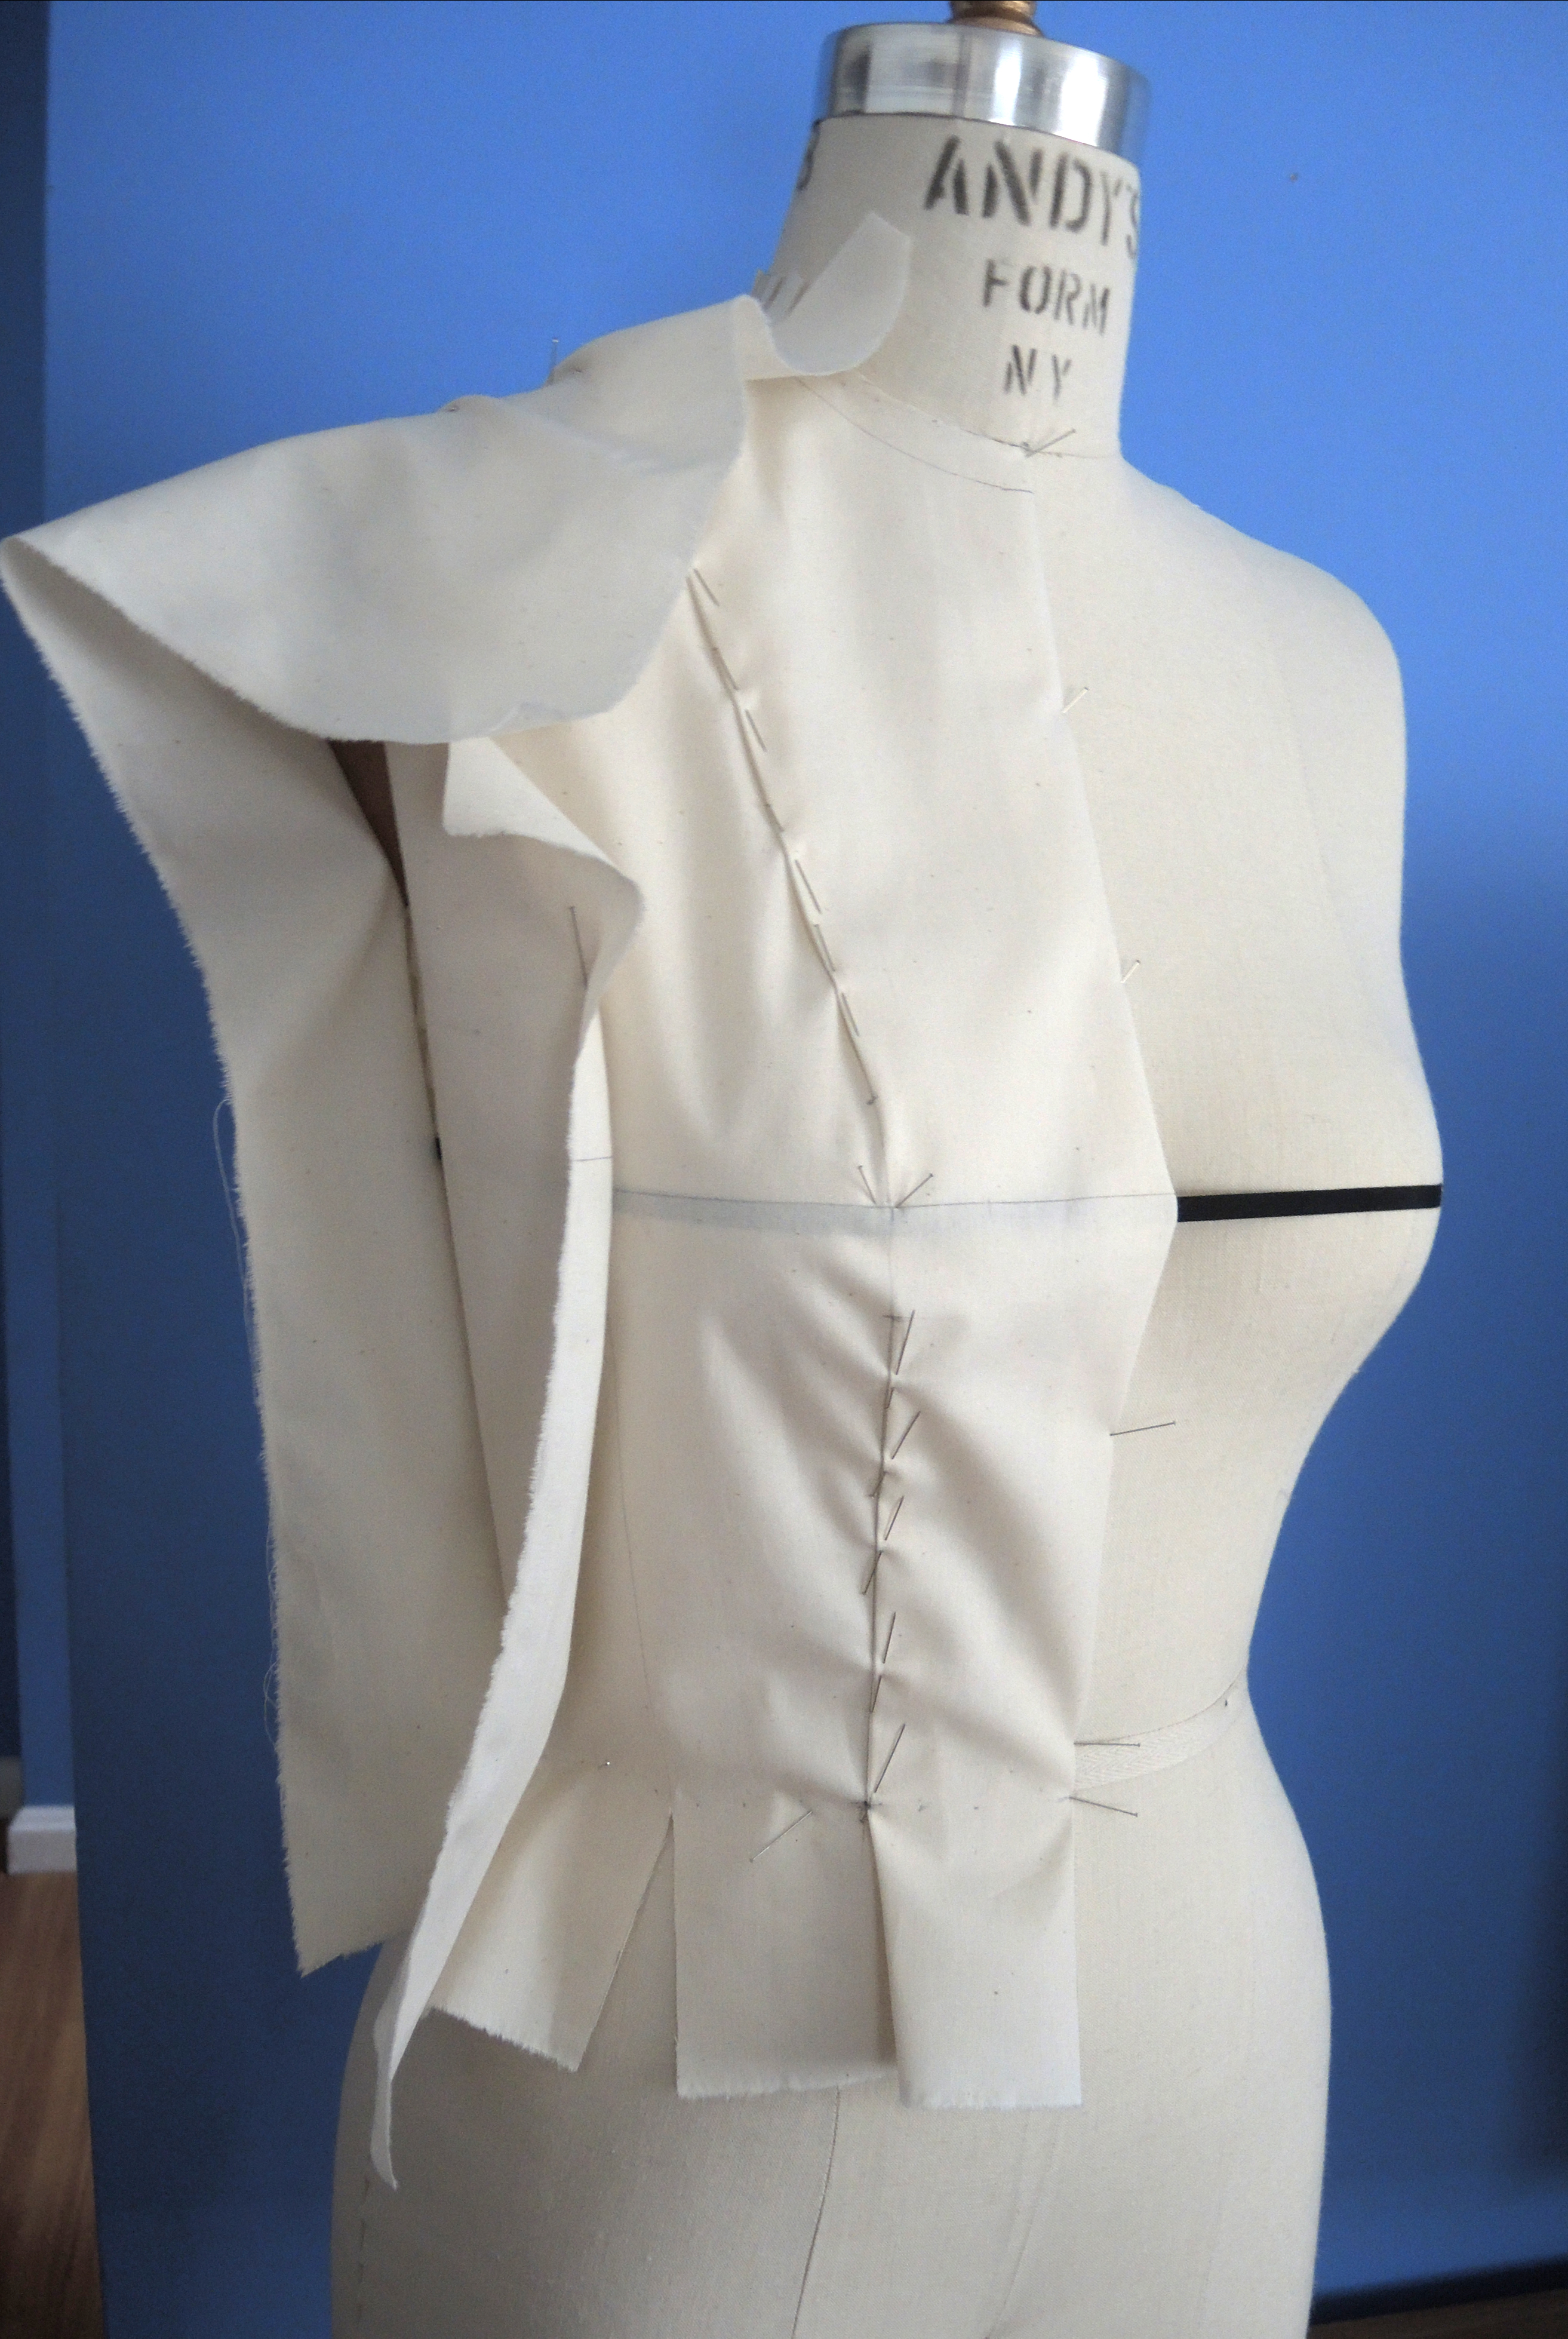 Draping Bodice Sloper - my 1st time! – Sewing Projects | BurdaStyle.com